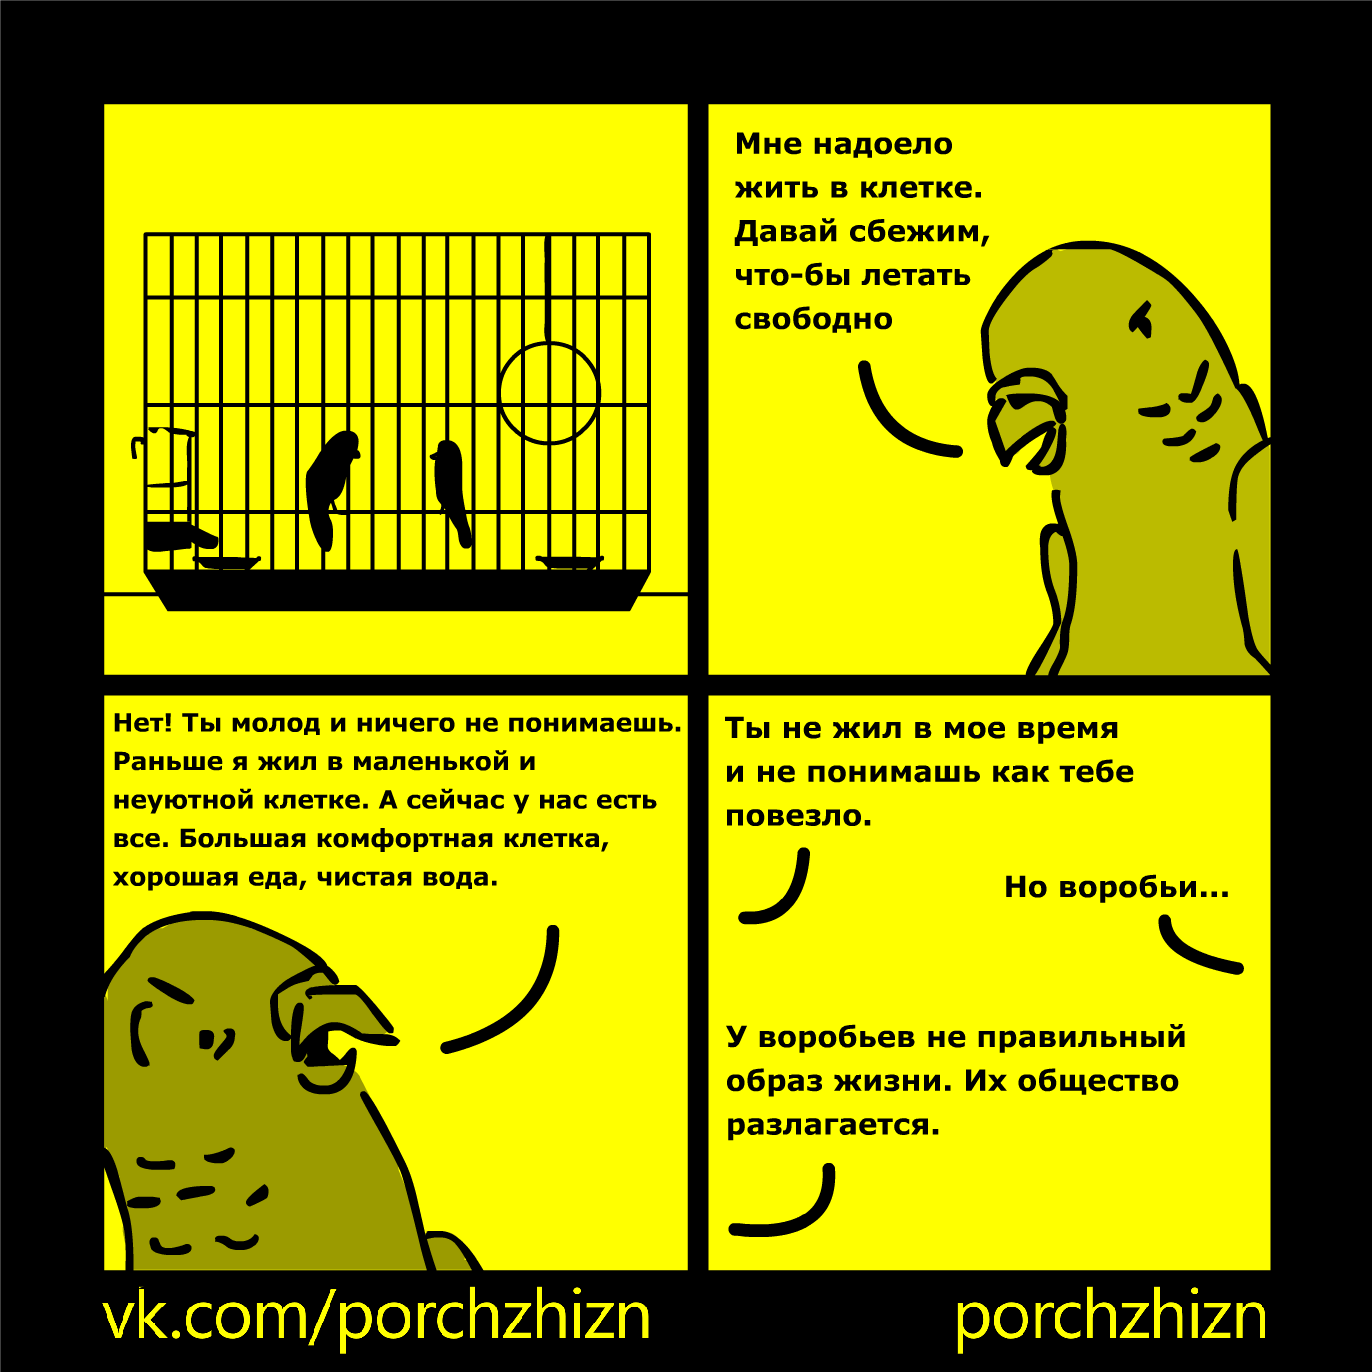 In a cage - My, Porchzhizn, A parrot